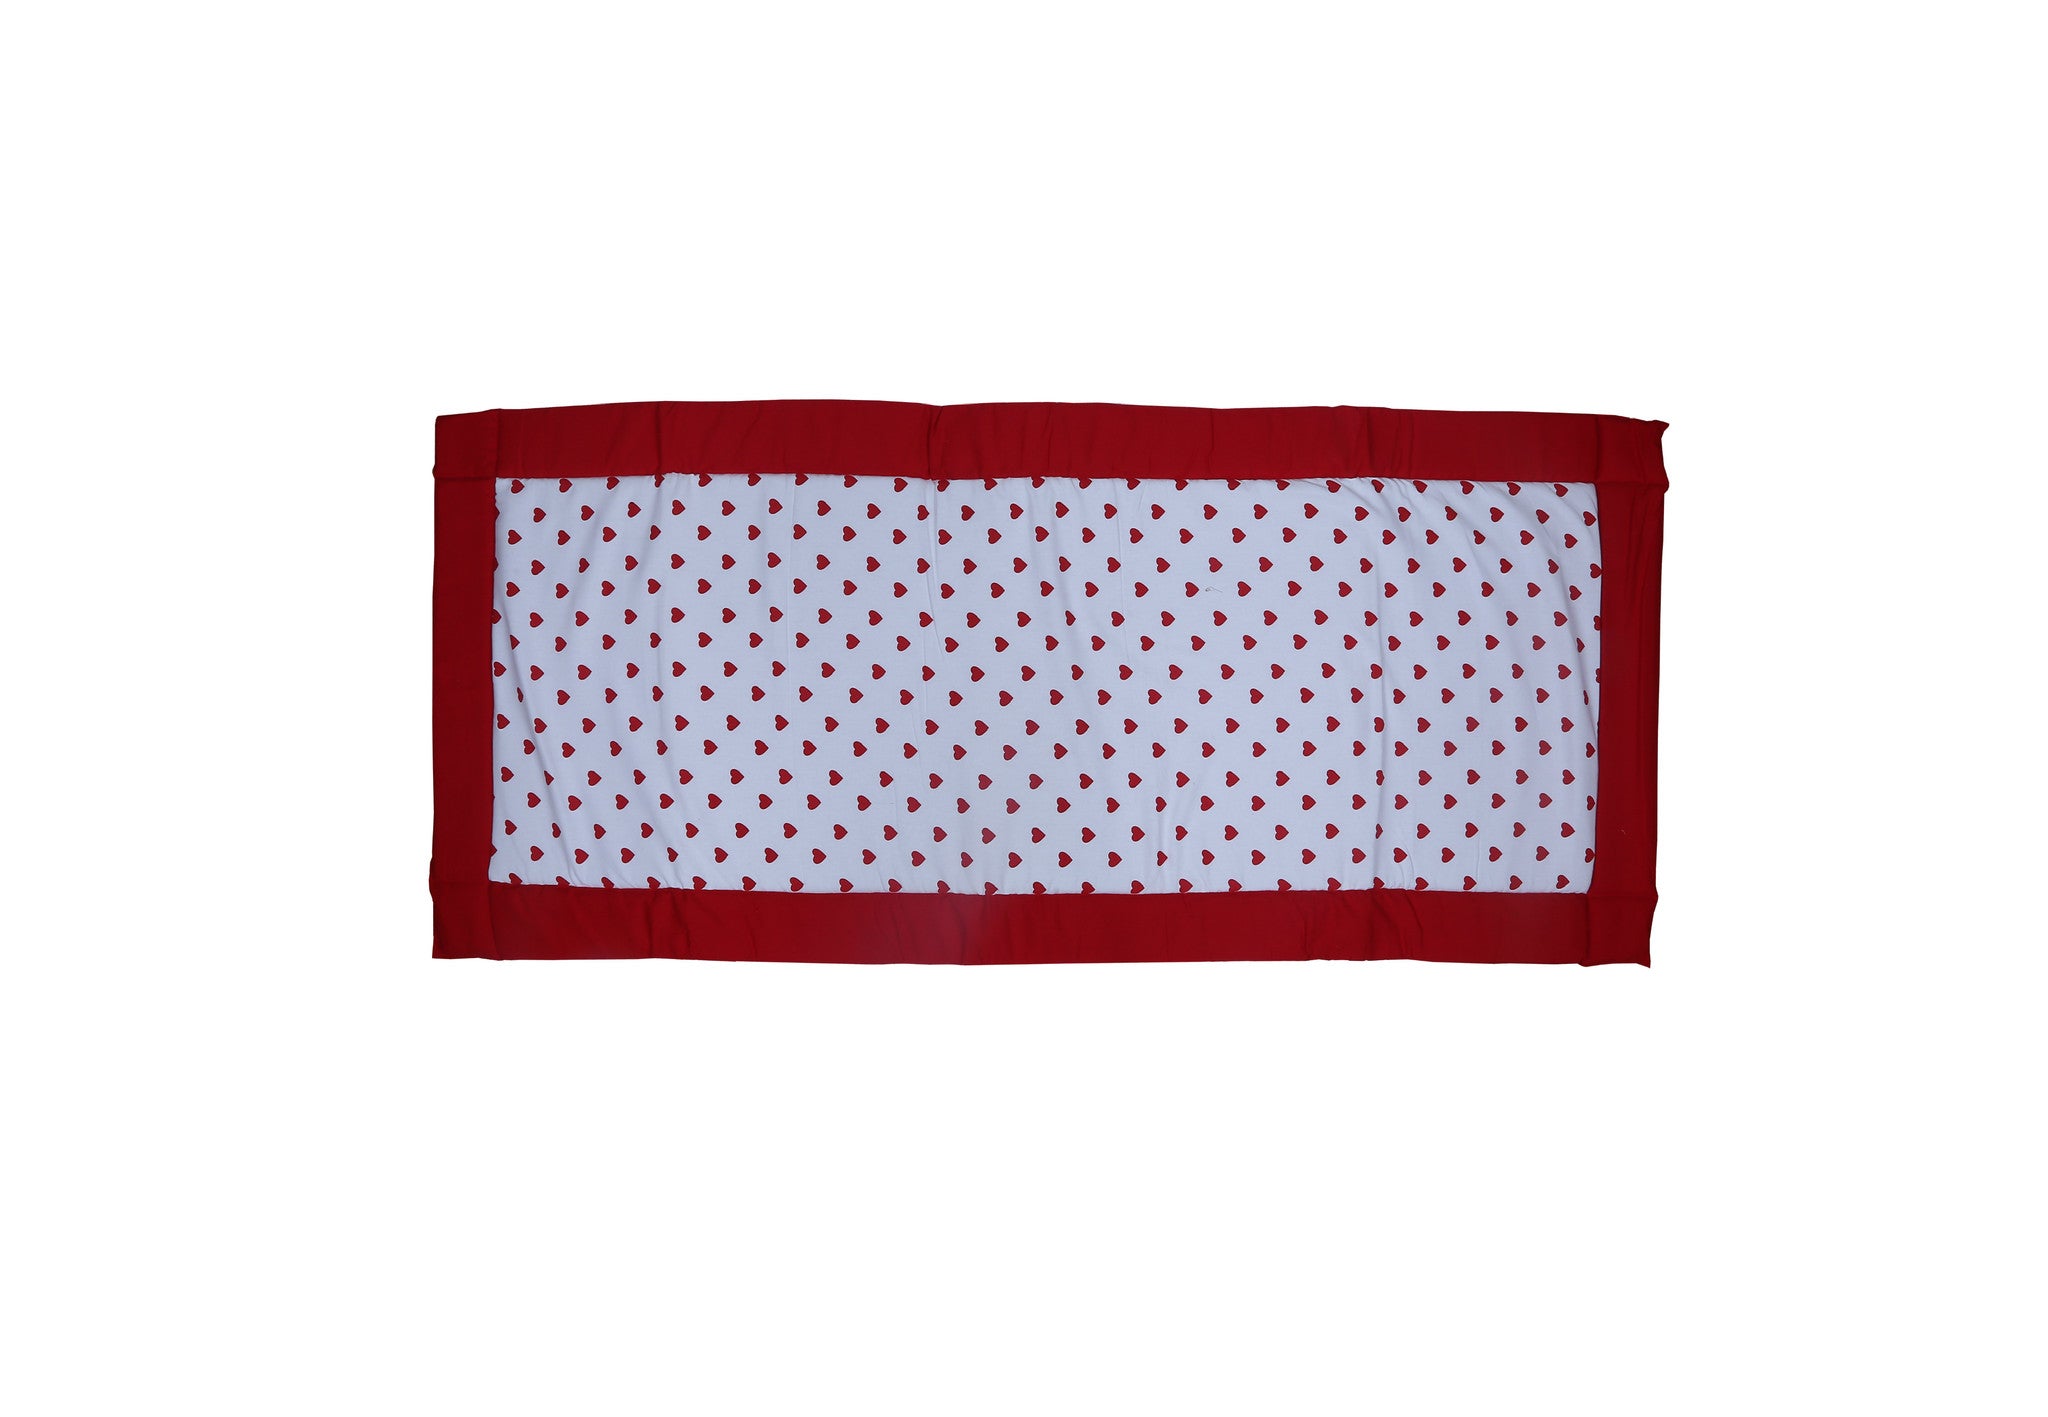 Foam Bed - Large Heart Red